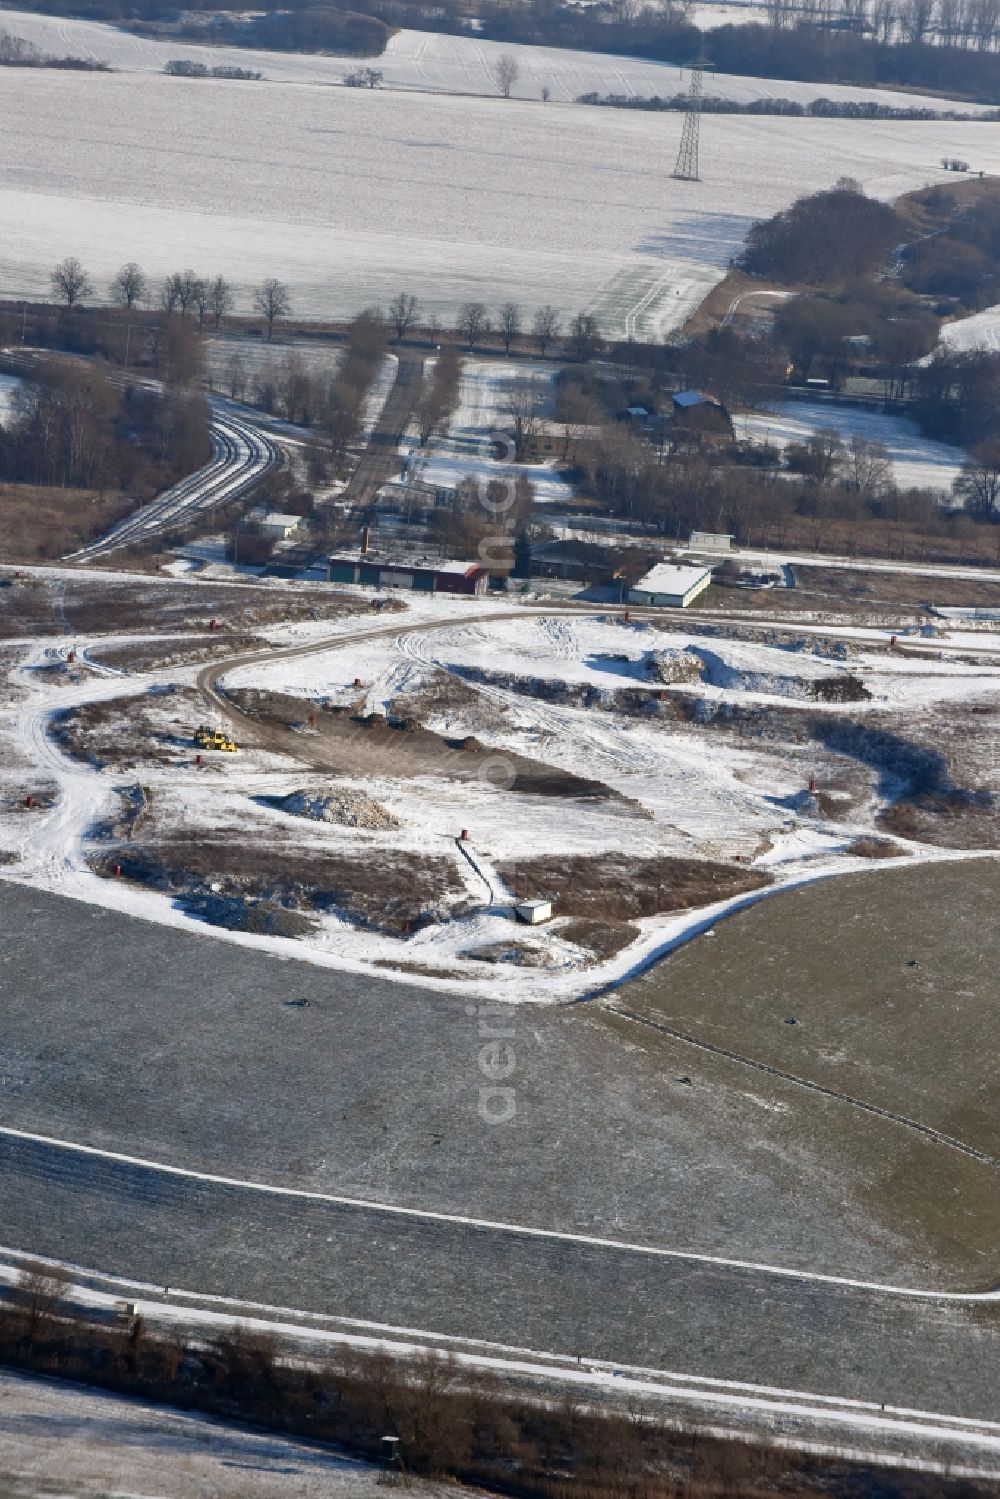 Ketzin from the bird's eye view: Wintry snowy site of heaped landfill in Ketzin in the state Brandenburg